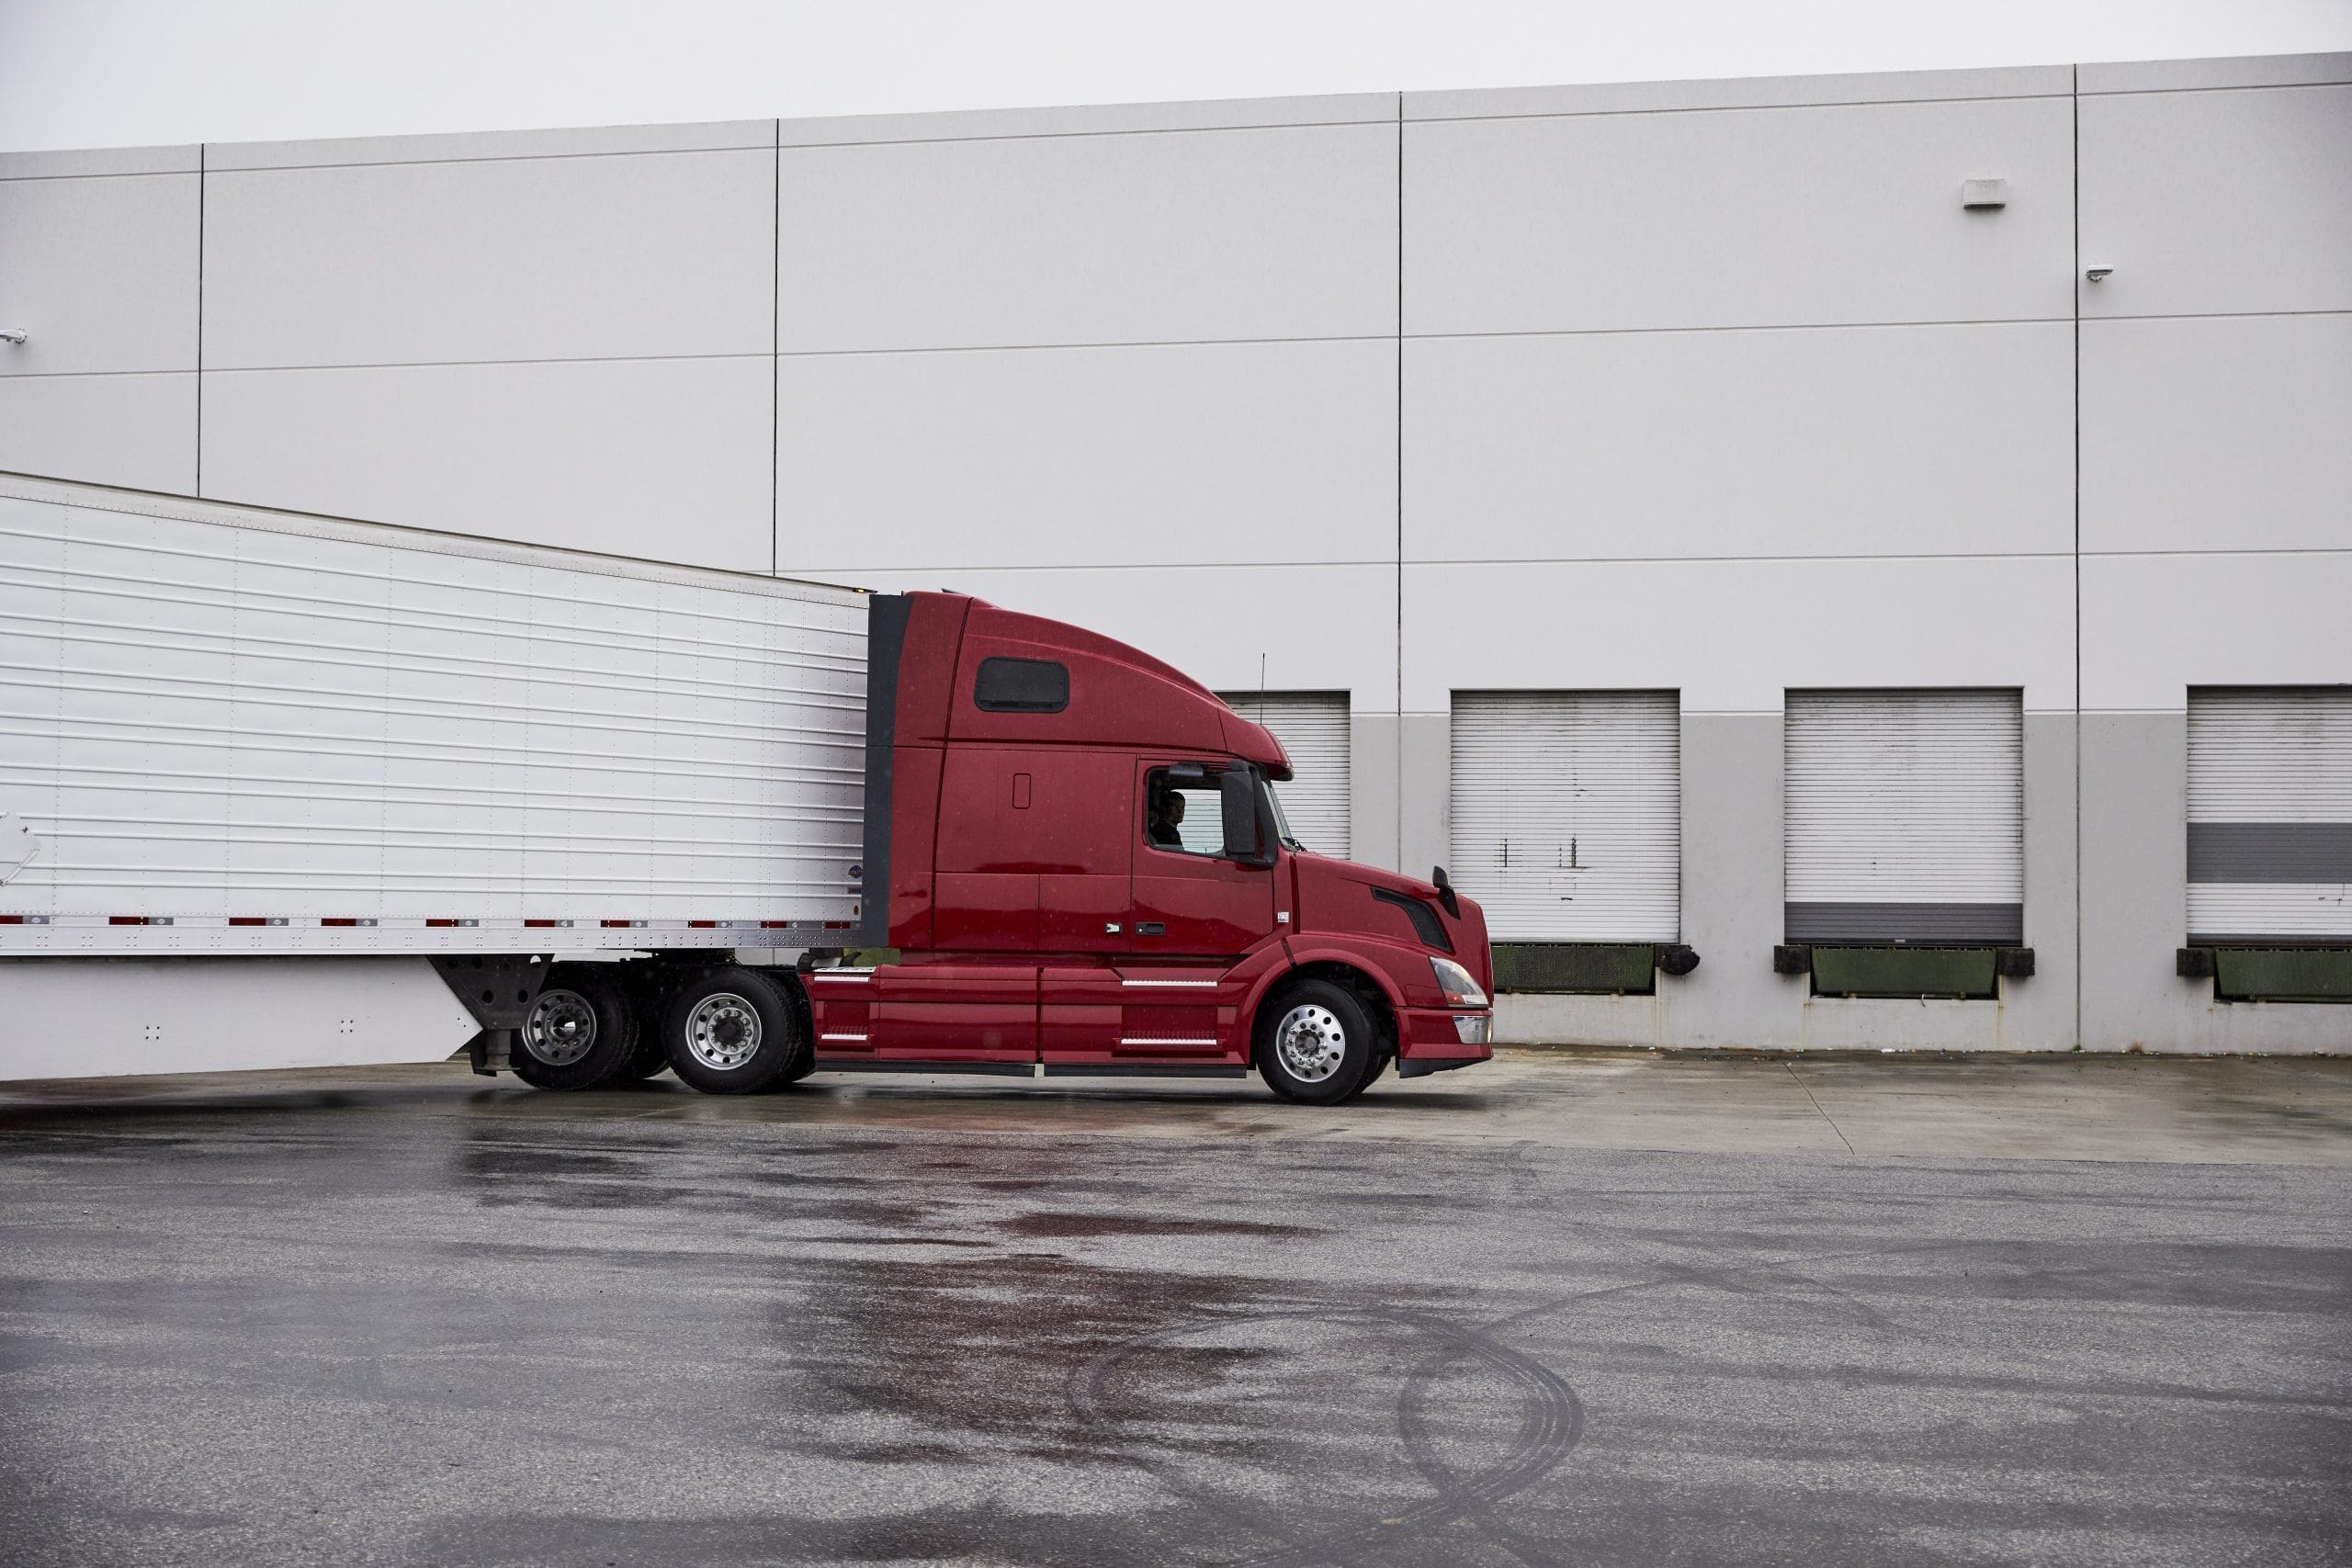 Key signals that the freight industry is showing signs of recovery